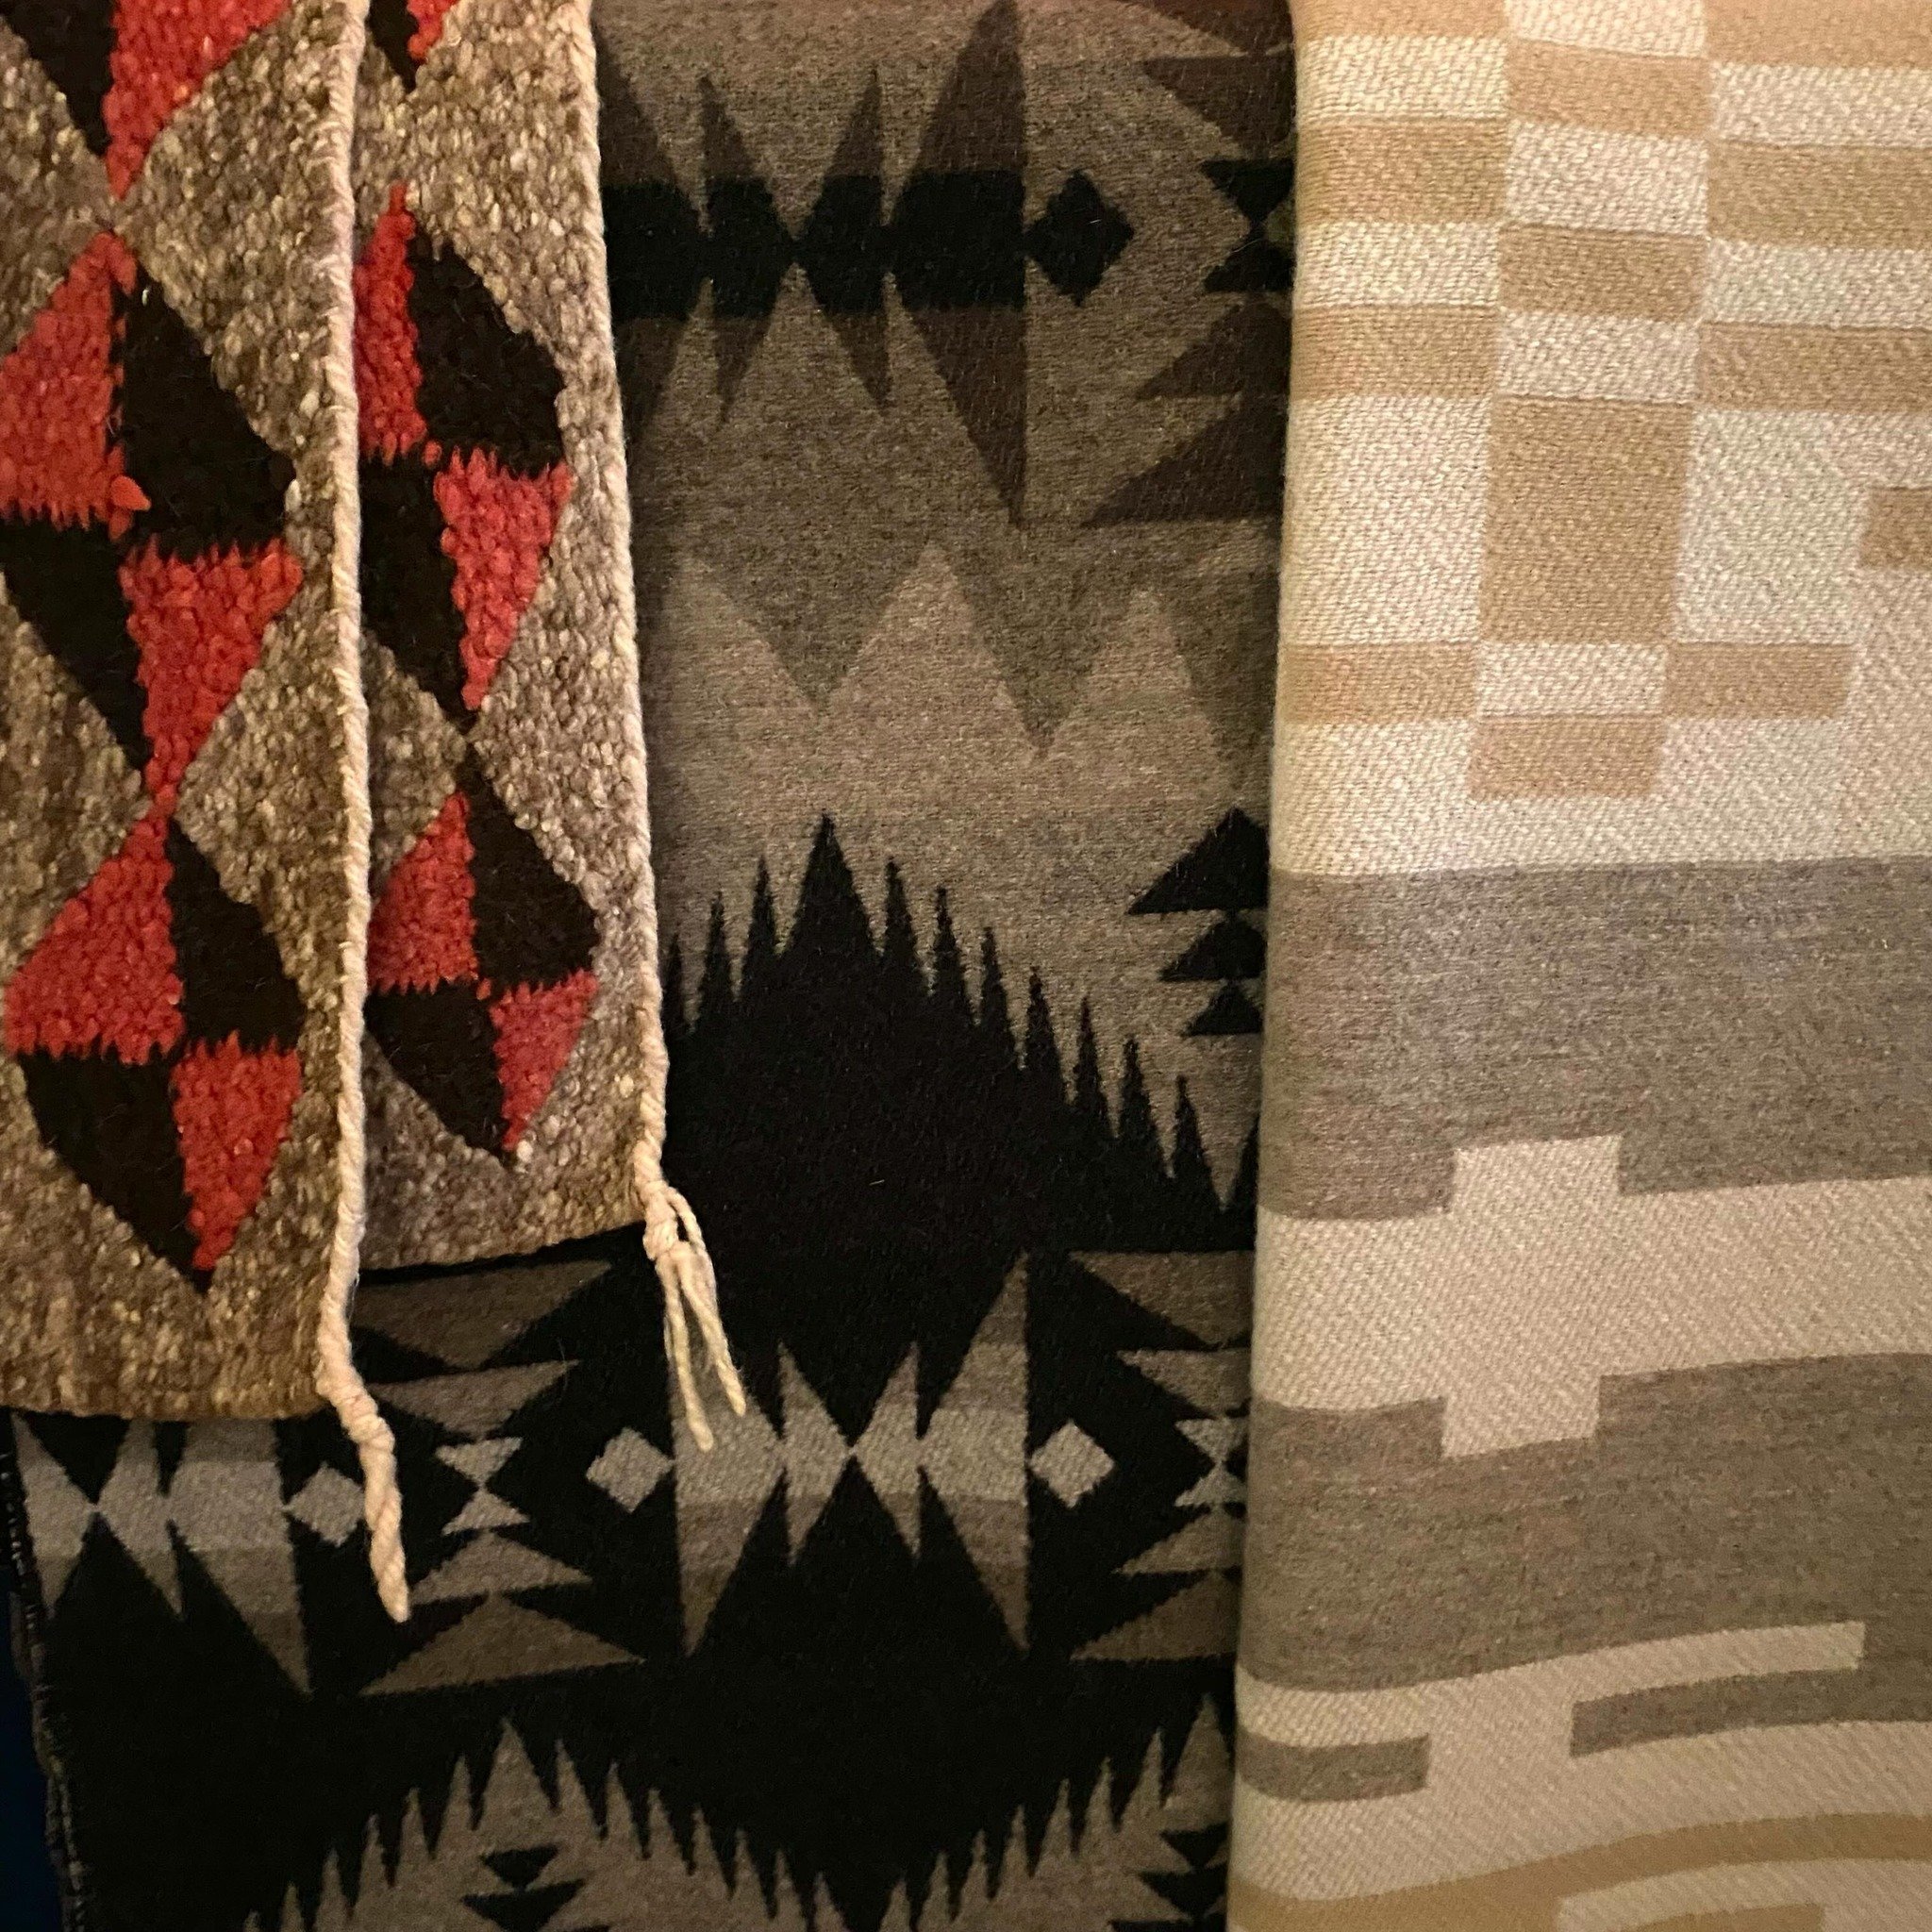 Pendleton 100% wool throws {&amp; a vintage Navajo Saddle Blanket} just part of our new Blanket &amp; Throws Collection ~ In Store Now 🌞🌞🌞 #WinterSnuggles #PendletonBlankets #PendletonThrows #SouthWestTrader #OxfordStreetPaddington #AussieWinter #